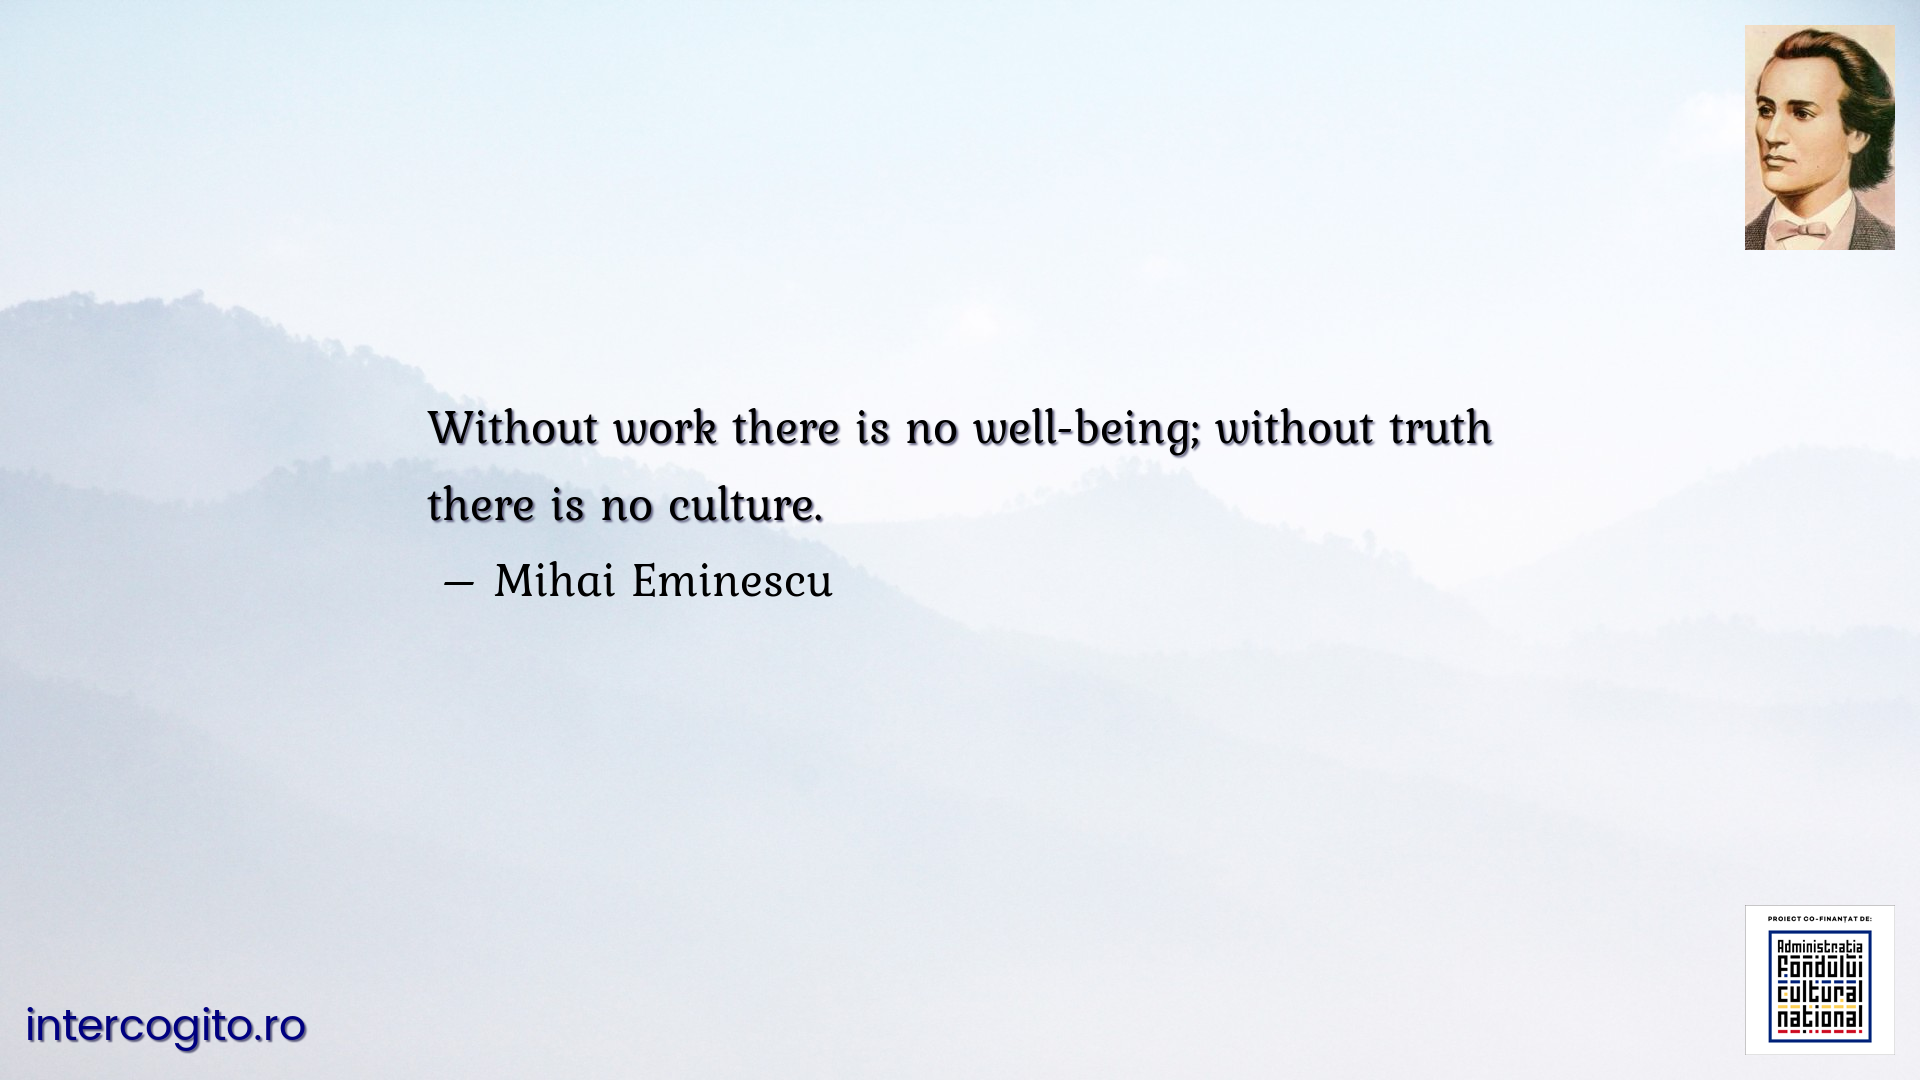 Without work there is no well-being; without truth there is no culture.